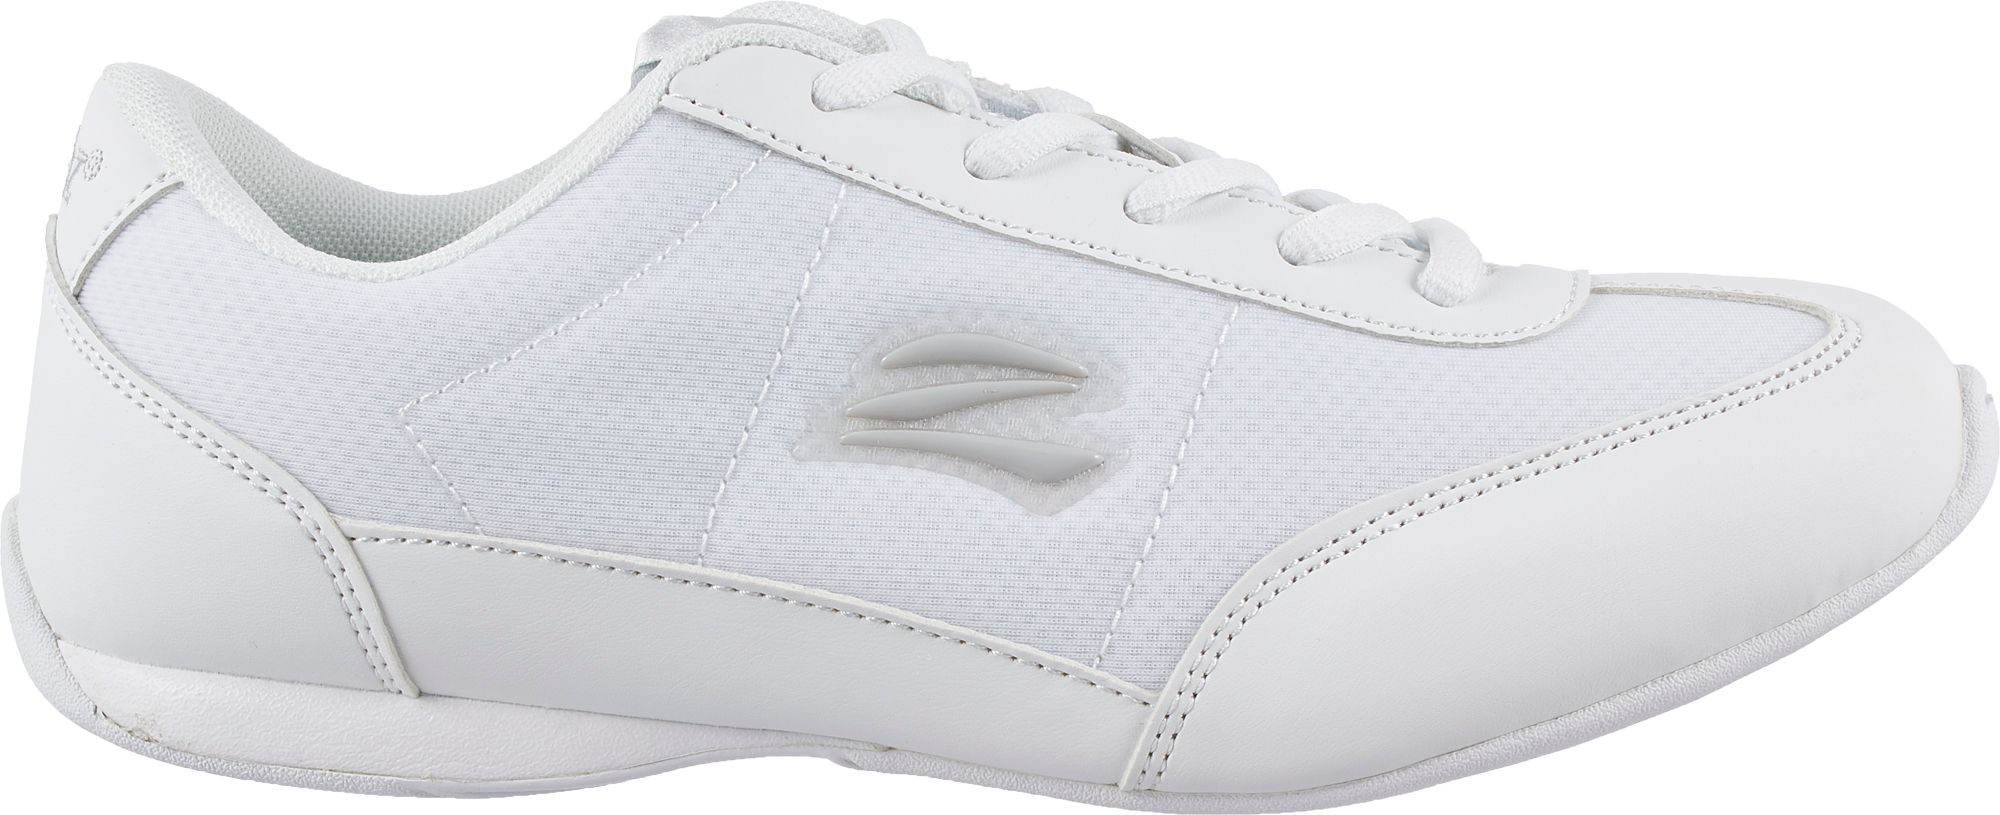 payless cheer shoes